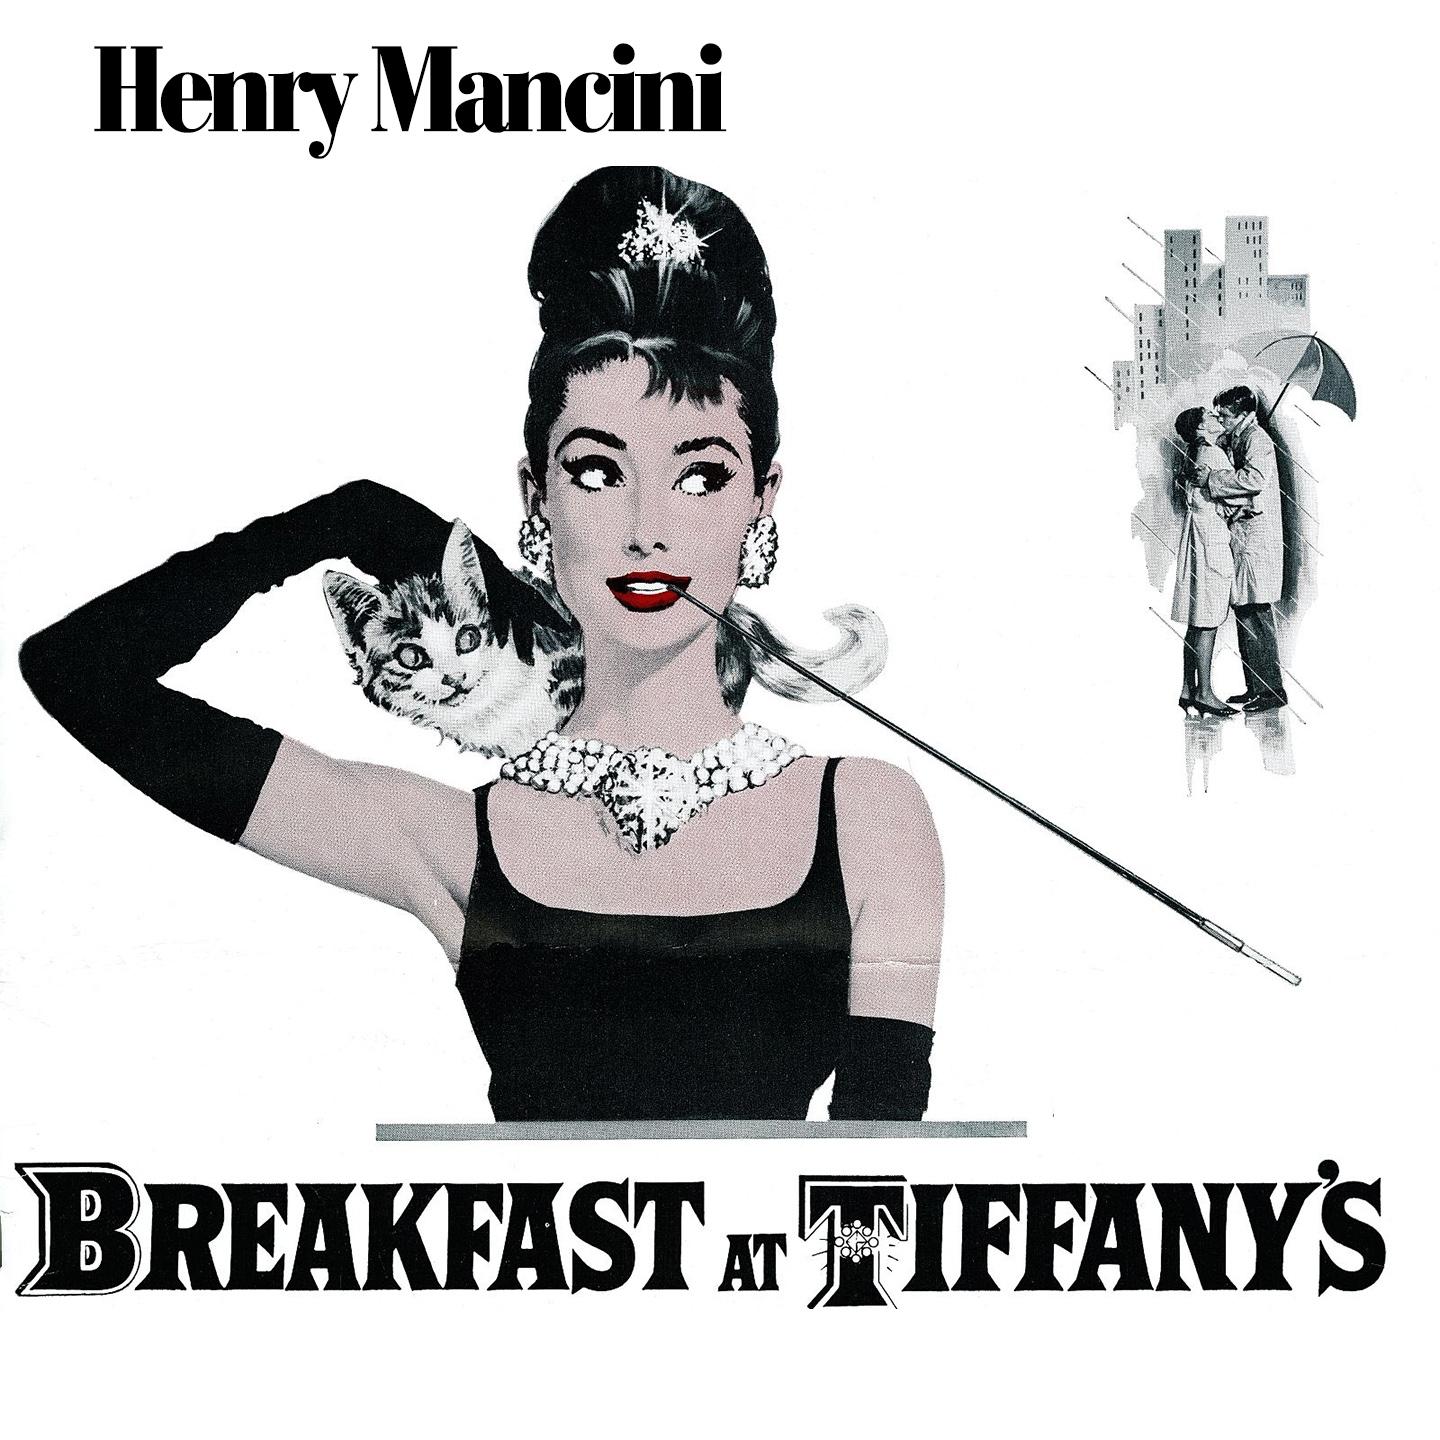 Breakfast at Tiffany's (Original Motion Picture Soundtrack)